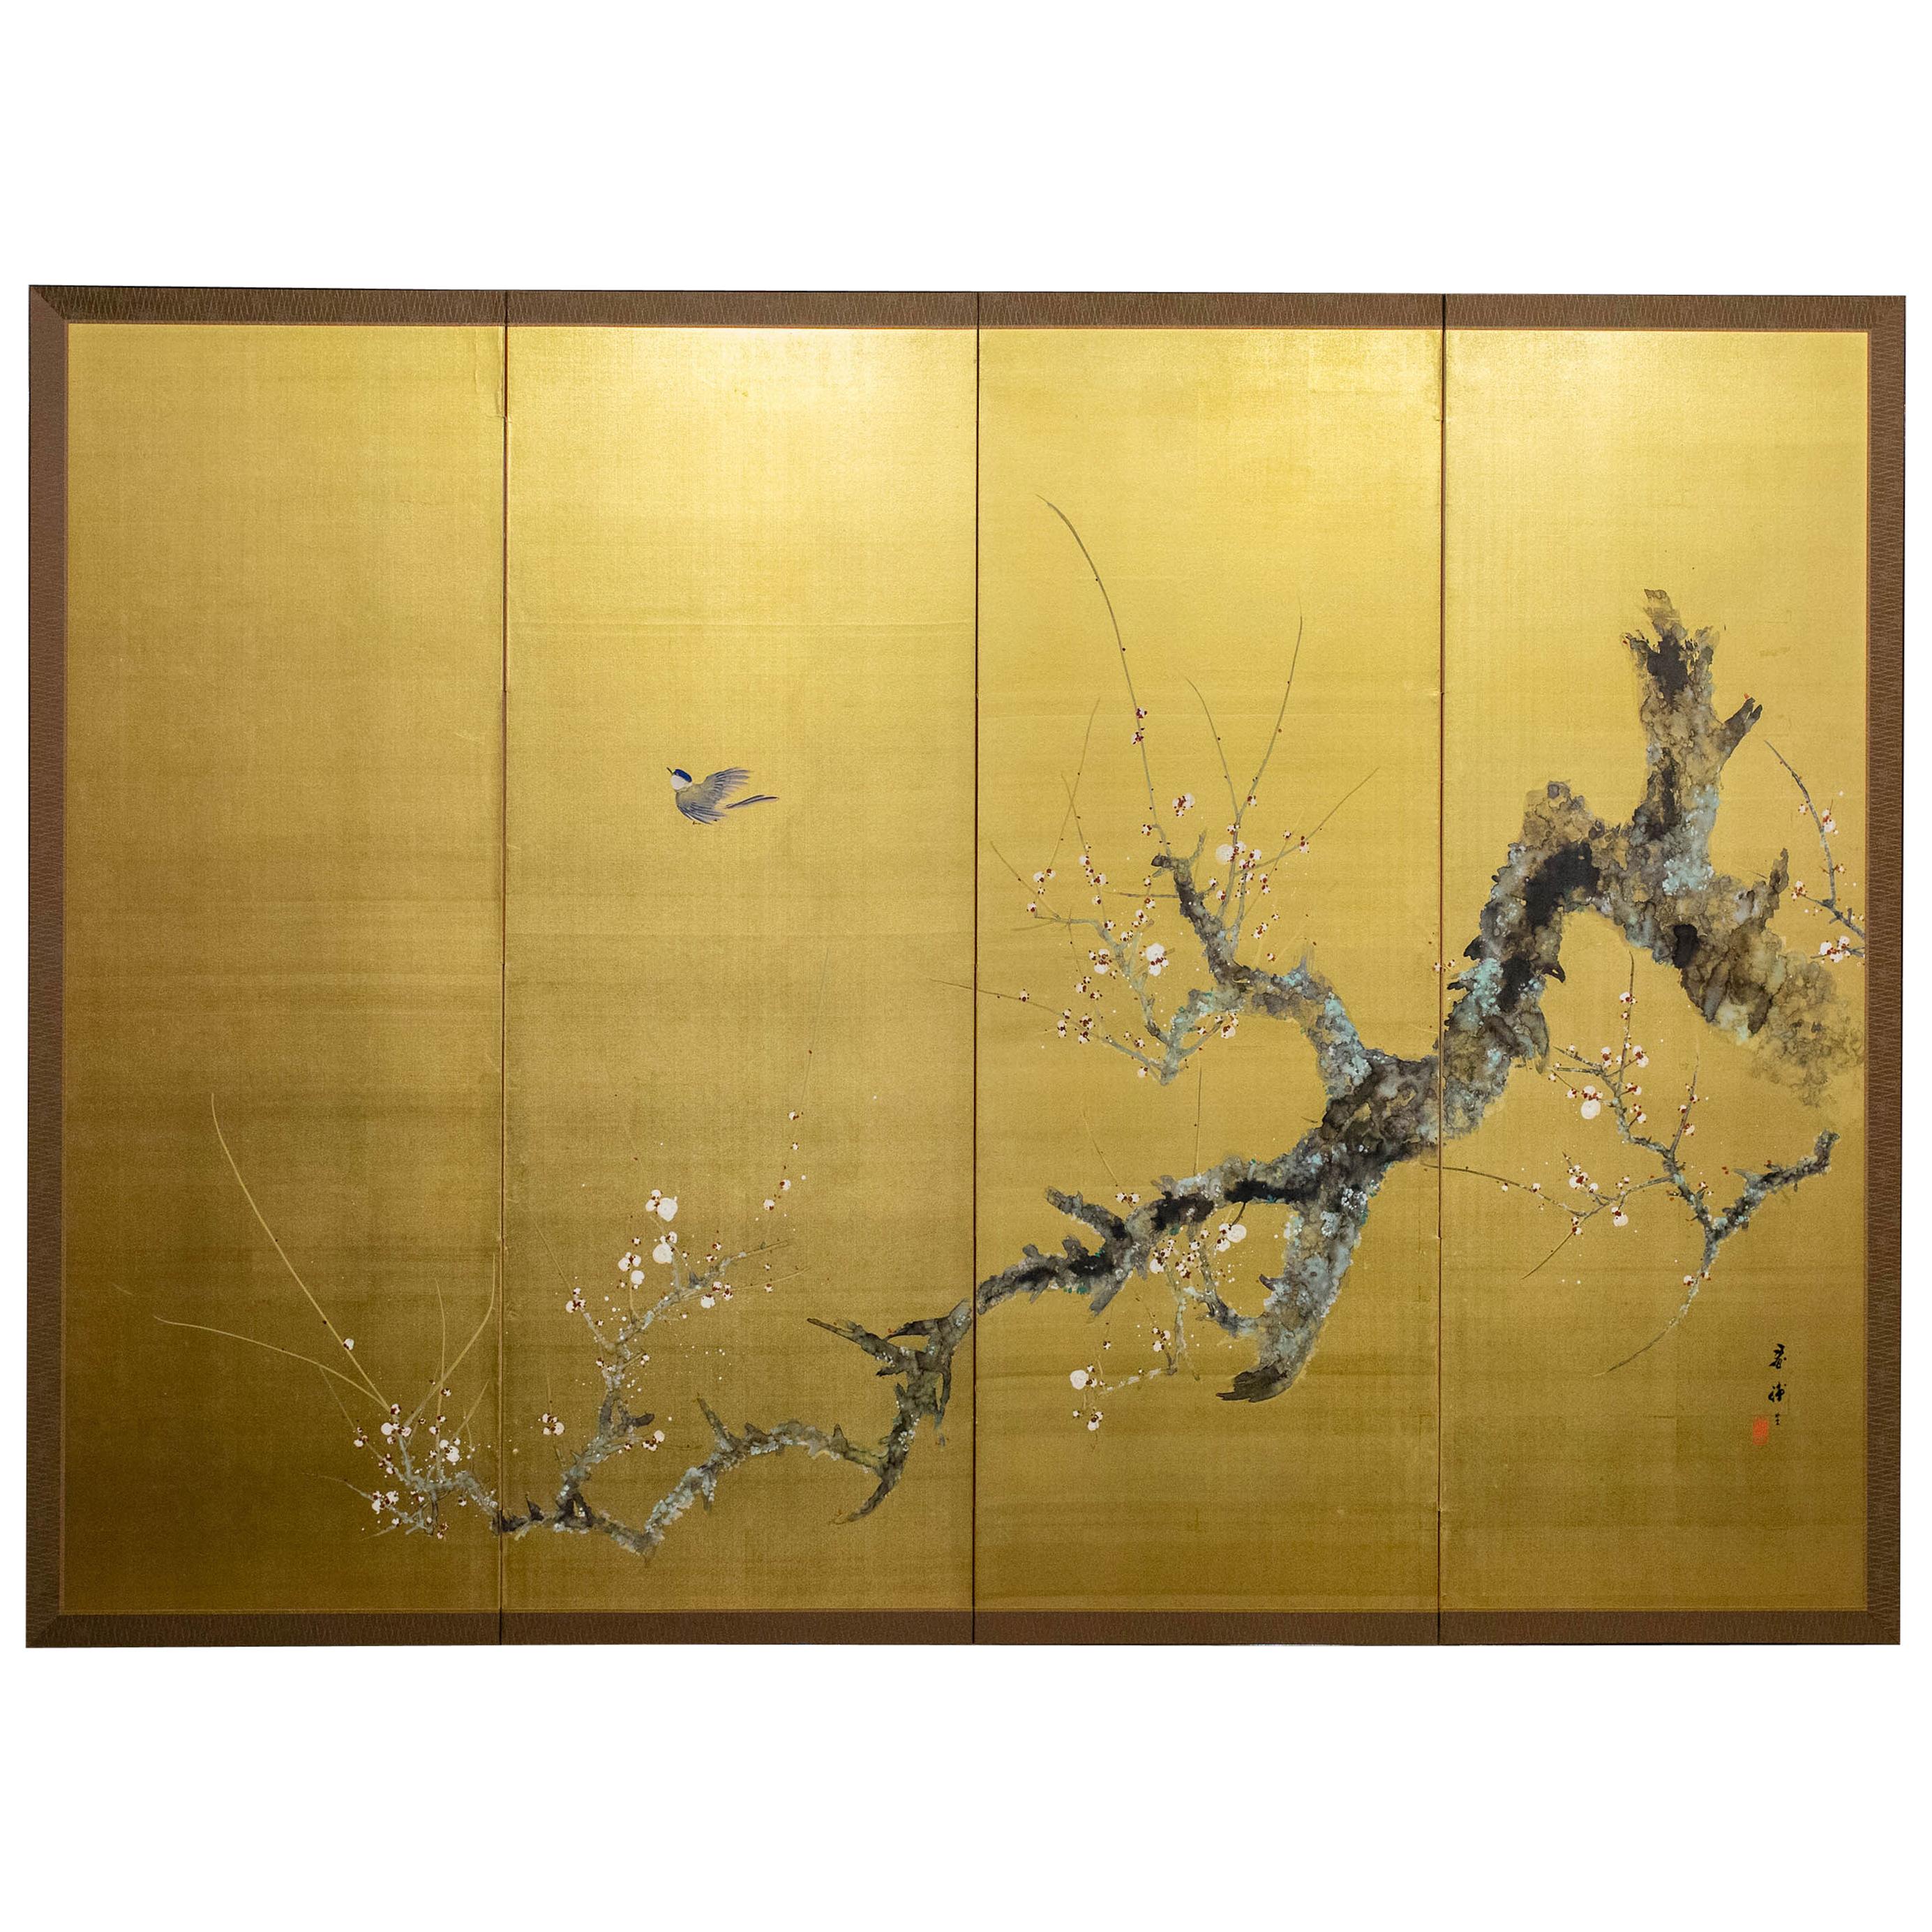 Japanese Four-Panel Screen "Old Plum on Gold"